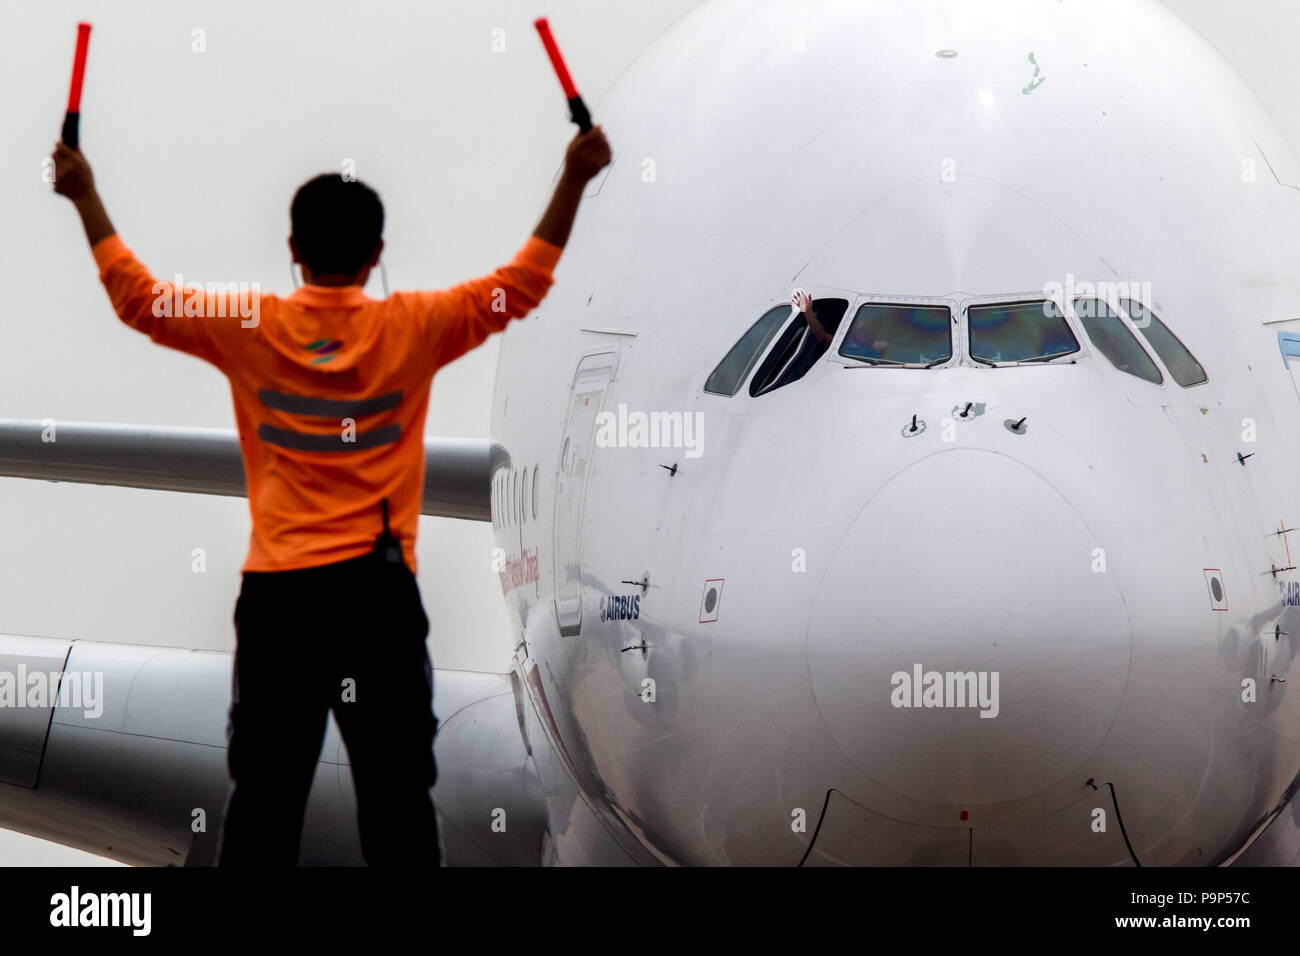 A marshaller pictured signaling the crew of the Airbus A380 at the Airshow China 2014 in Zhuhai, China. Stock Photo